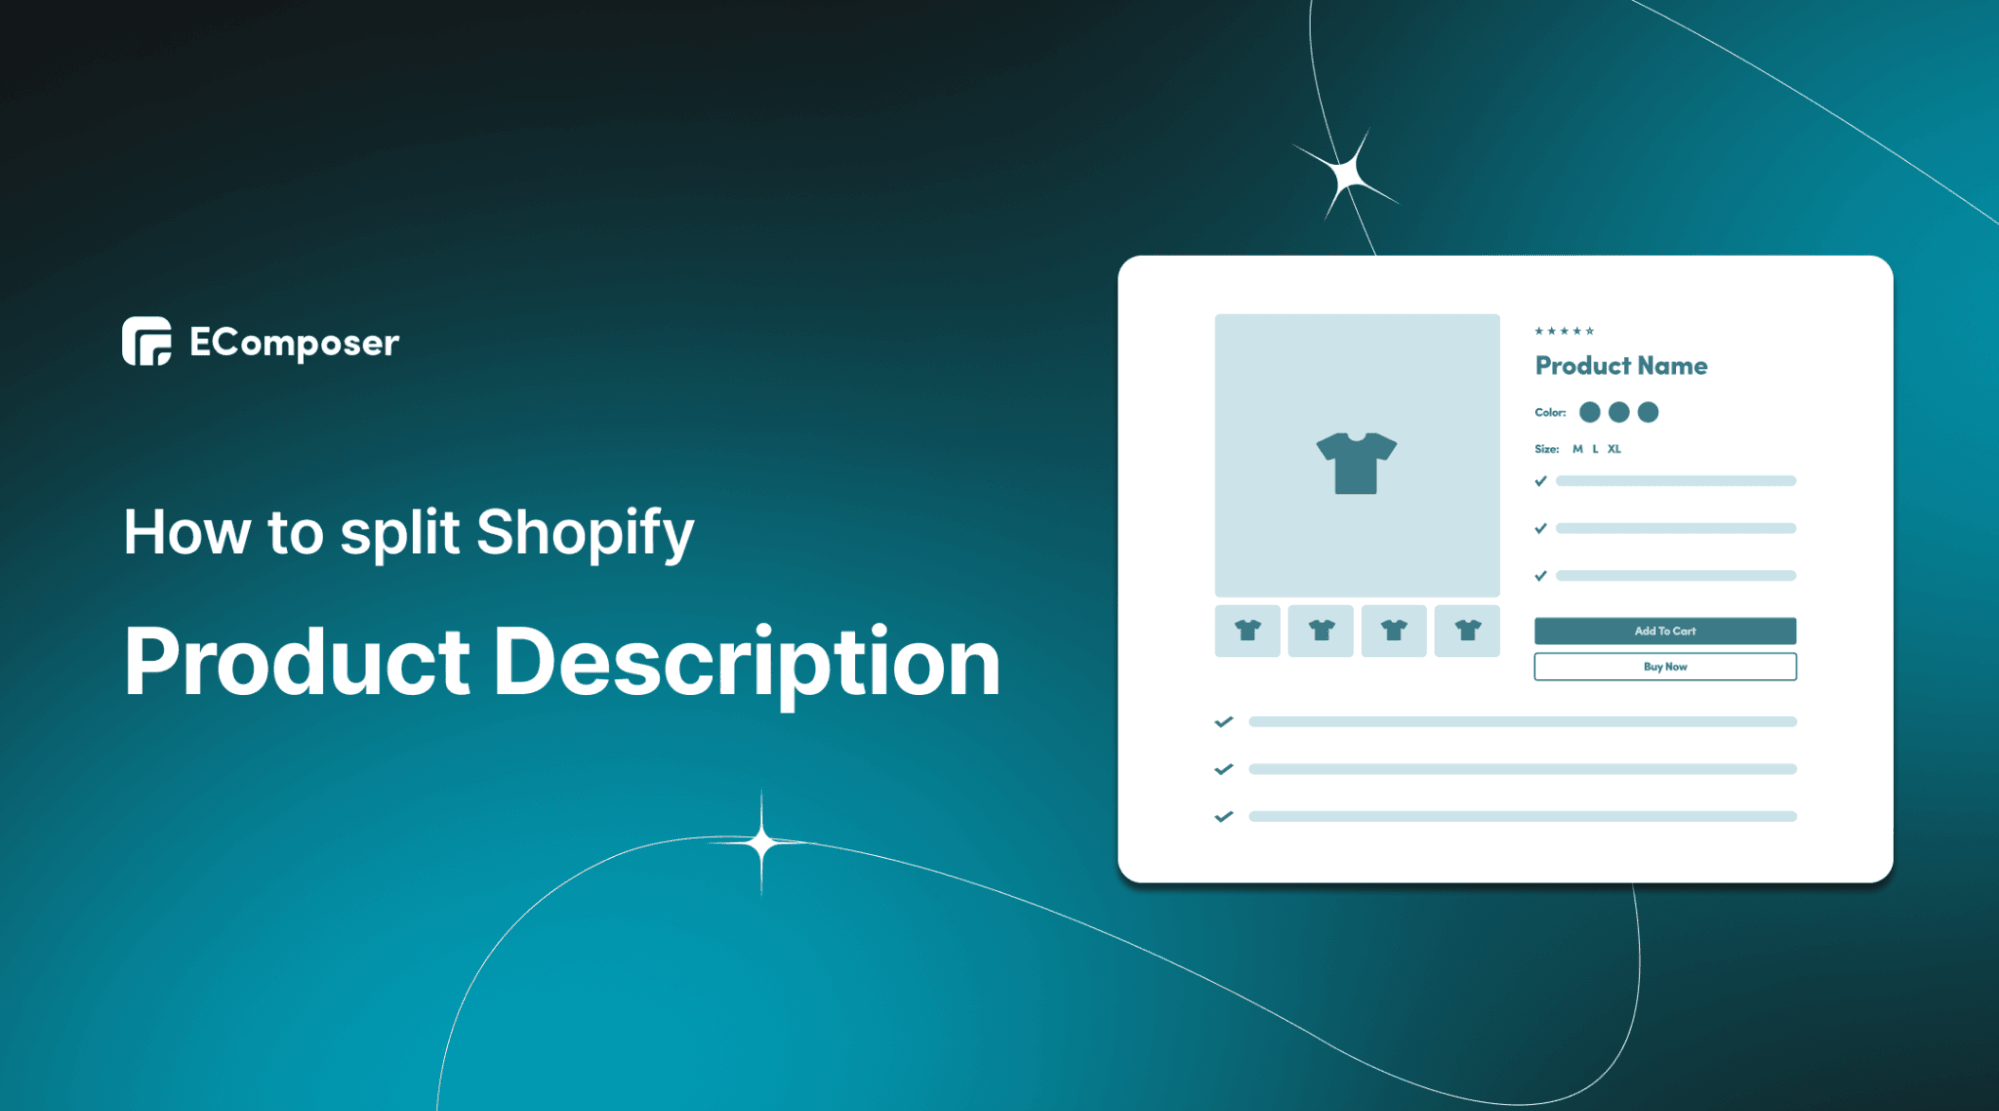 Adding a customer login template to Shopify